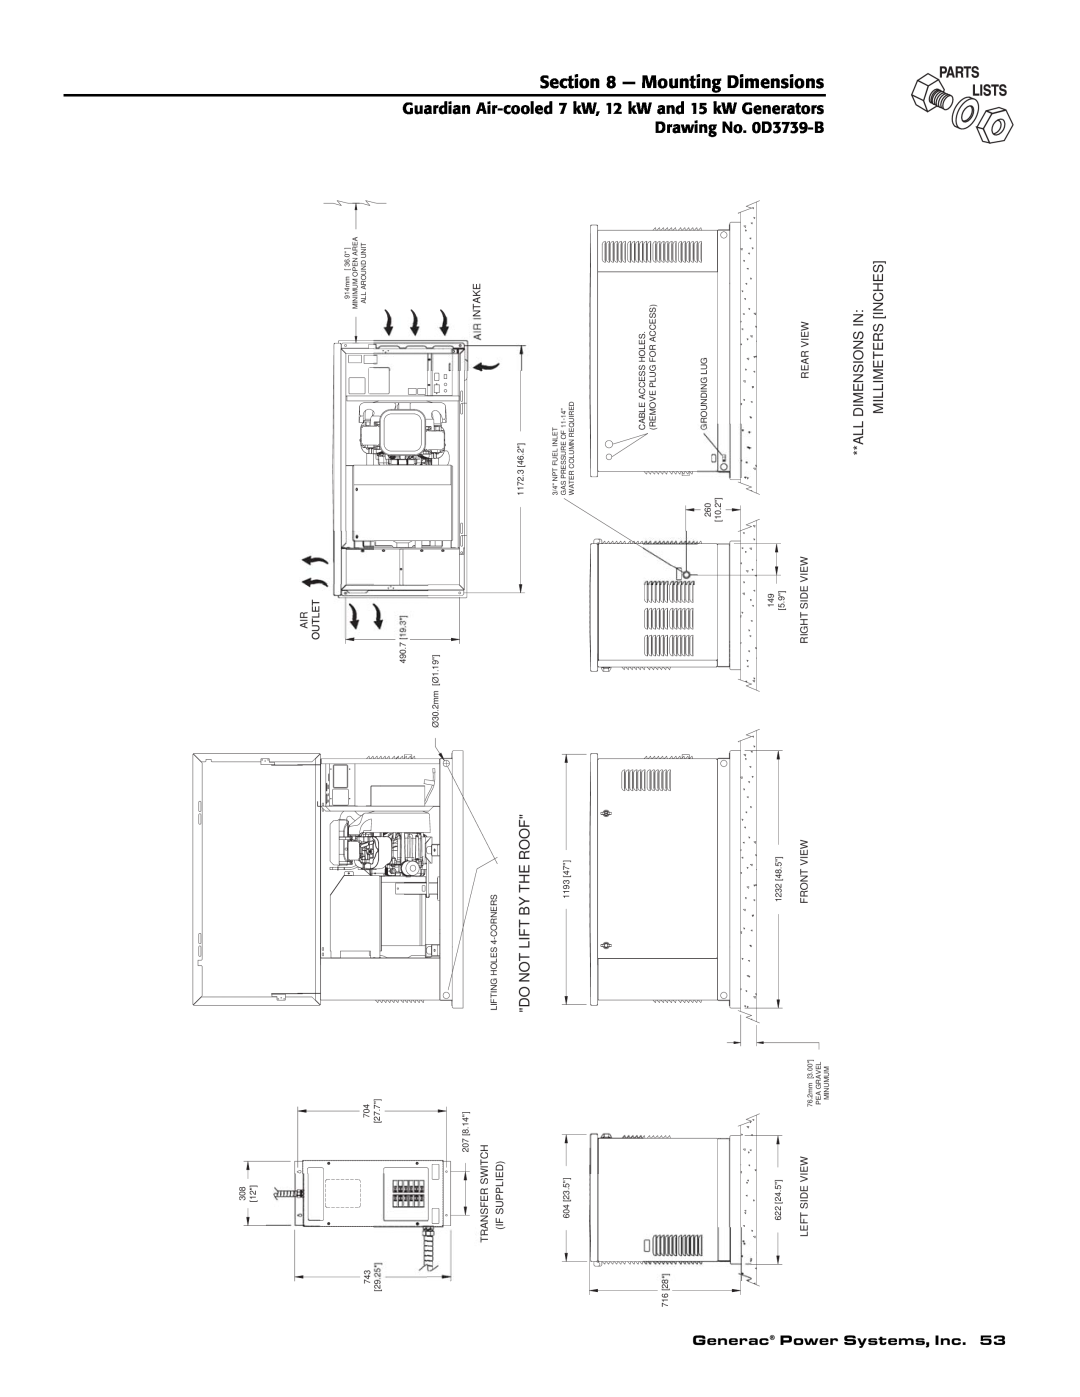 Generac Power Systems 04456-1, 04390-1, 04389-1 owner manual Mounting Dimensions, Guardian Air, Generac Power Systems, Inc 